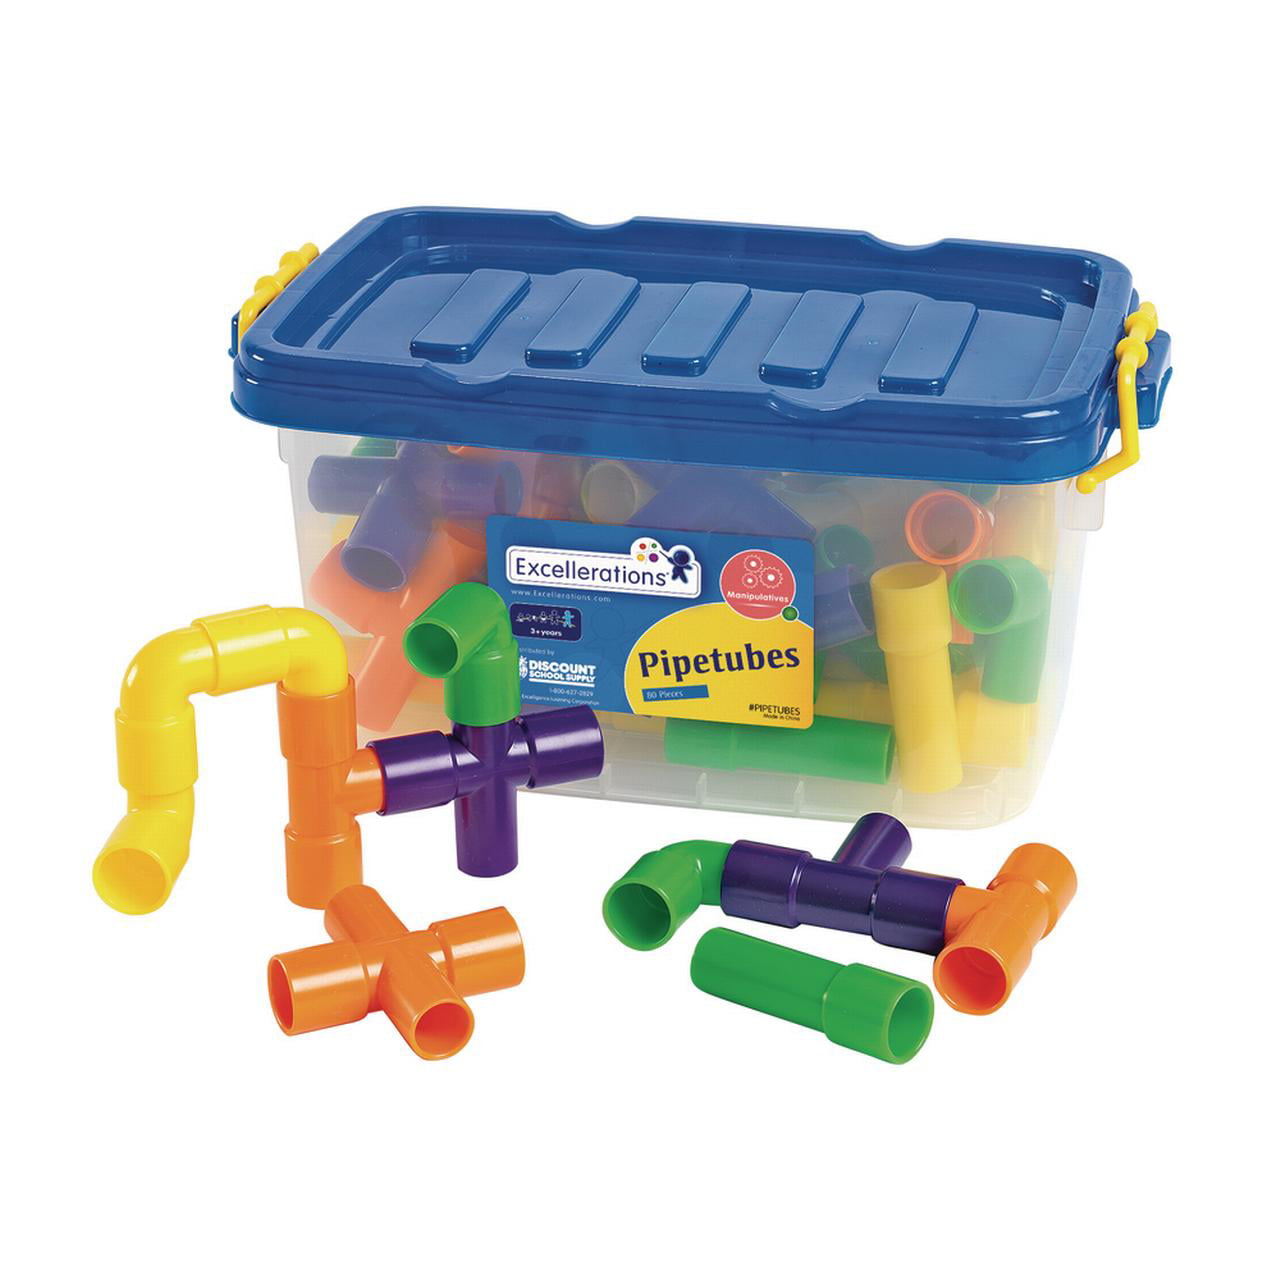 Interlocking Educational Sensory Learning Toys for Children with Storage Container ECR4Kids Totally Tubular Pipes & Spout STEAM Manipulatives Building Block Set 160-Piece Set 